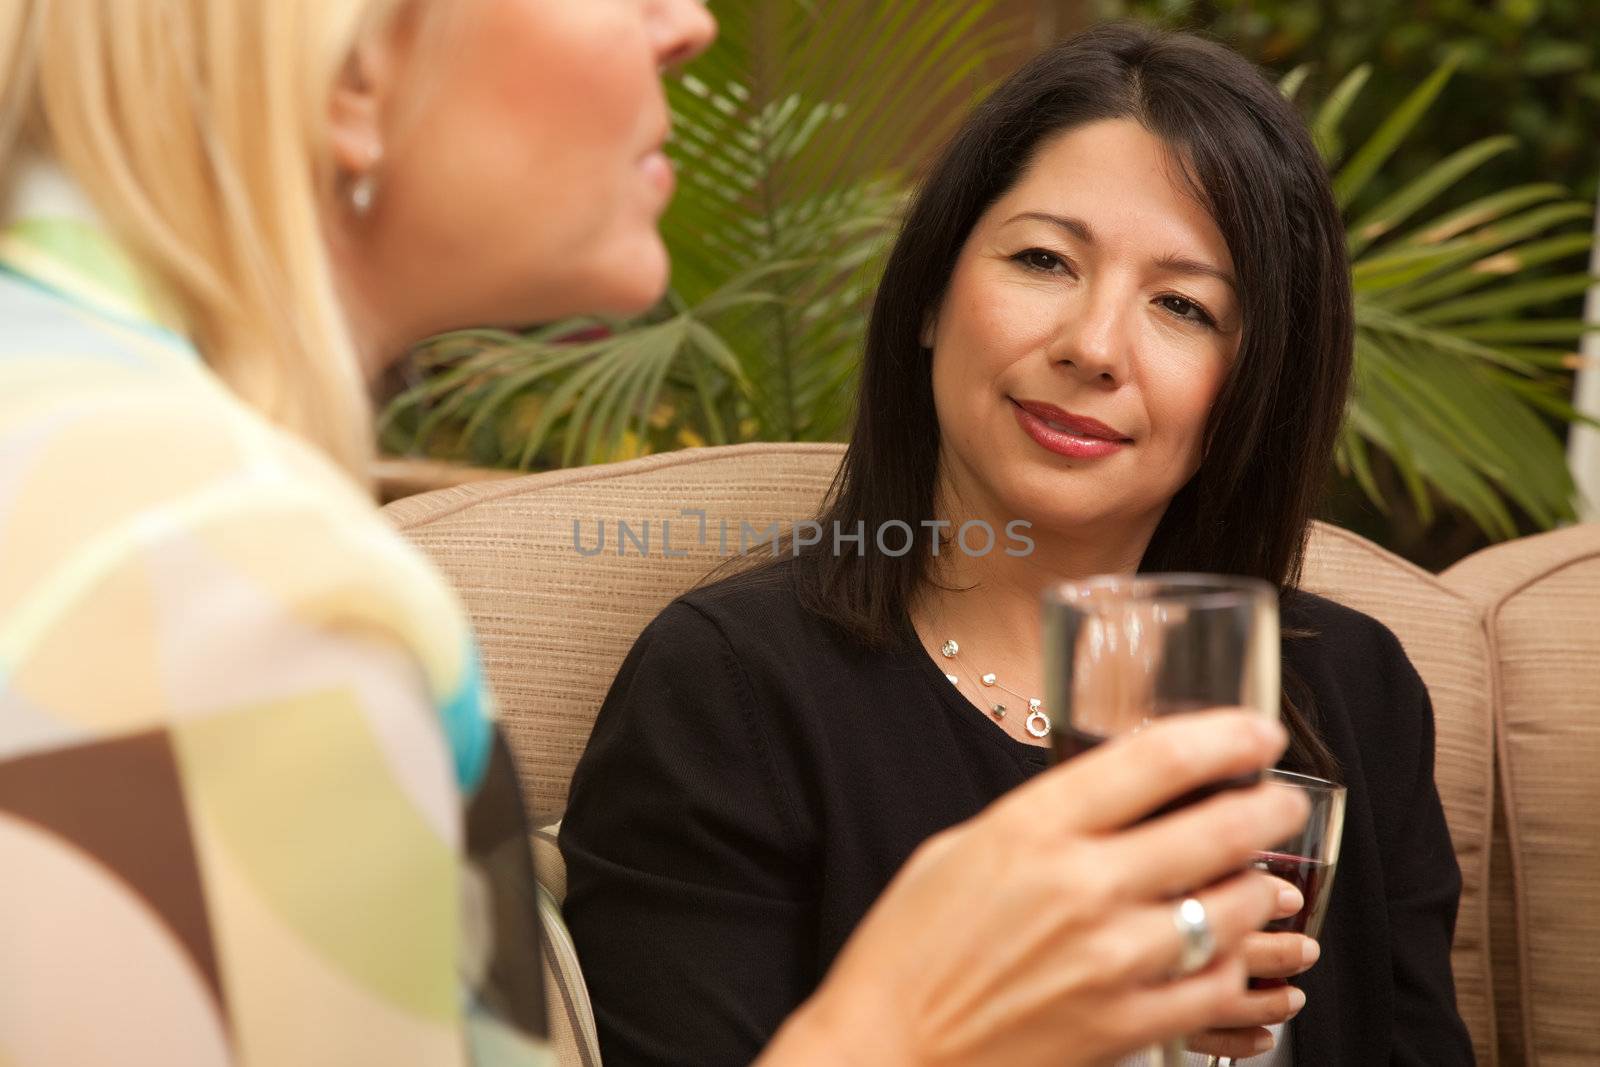 Two Girlfriends Enjoy Wine on the Patio by Feverpitched